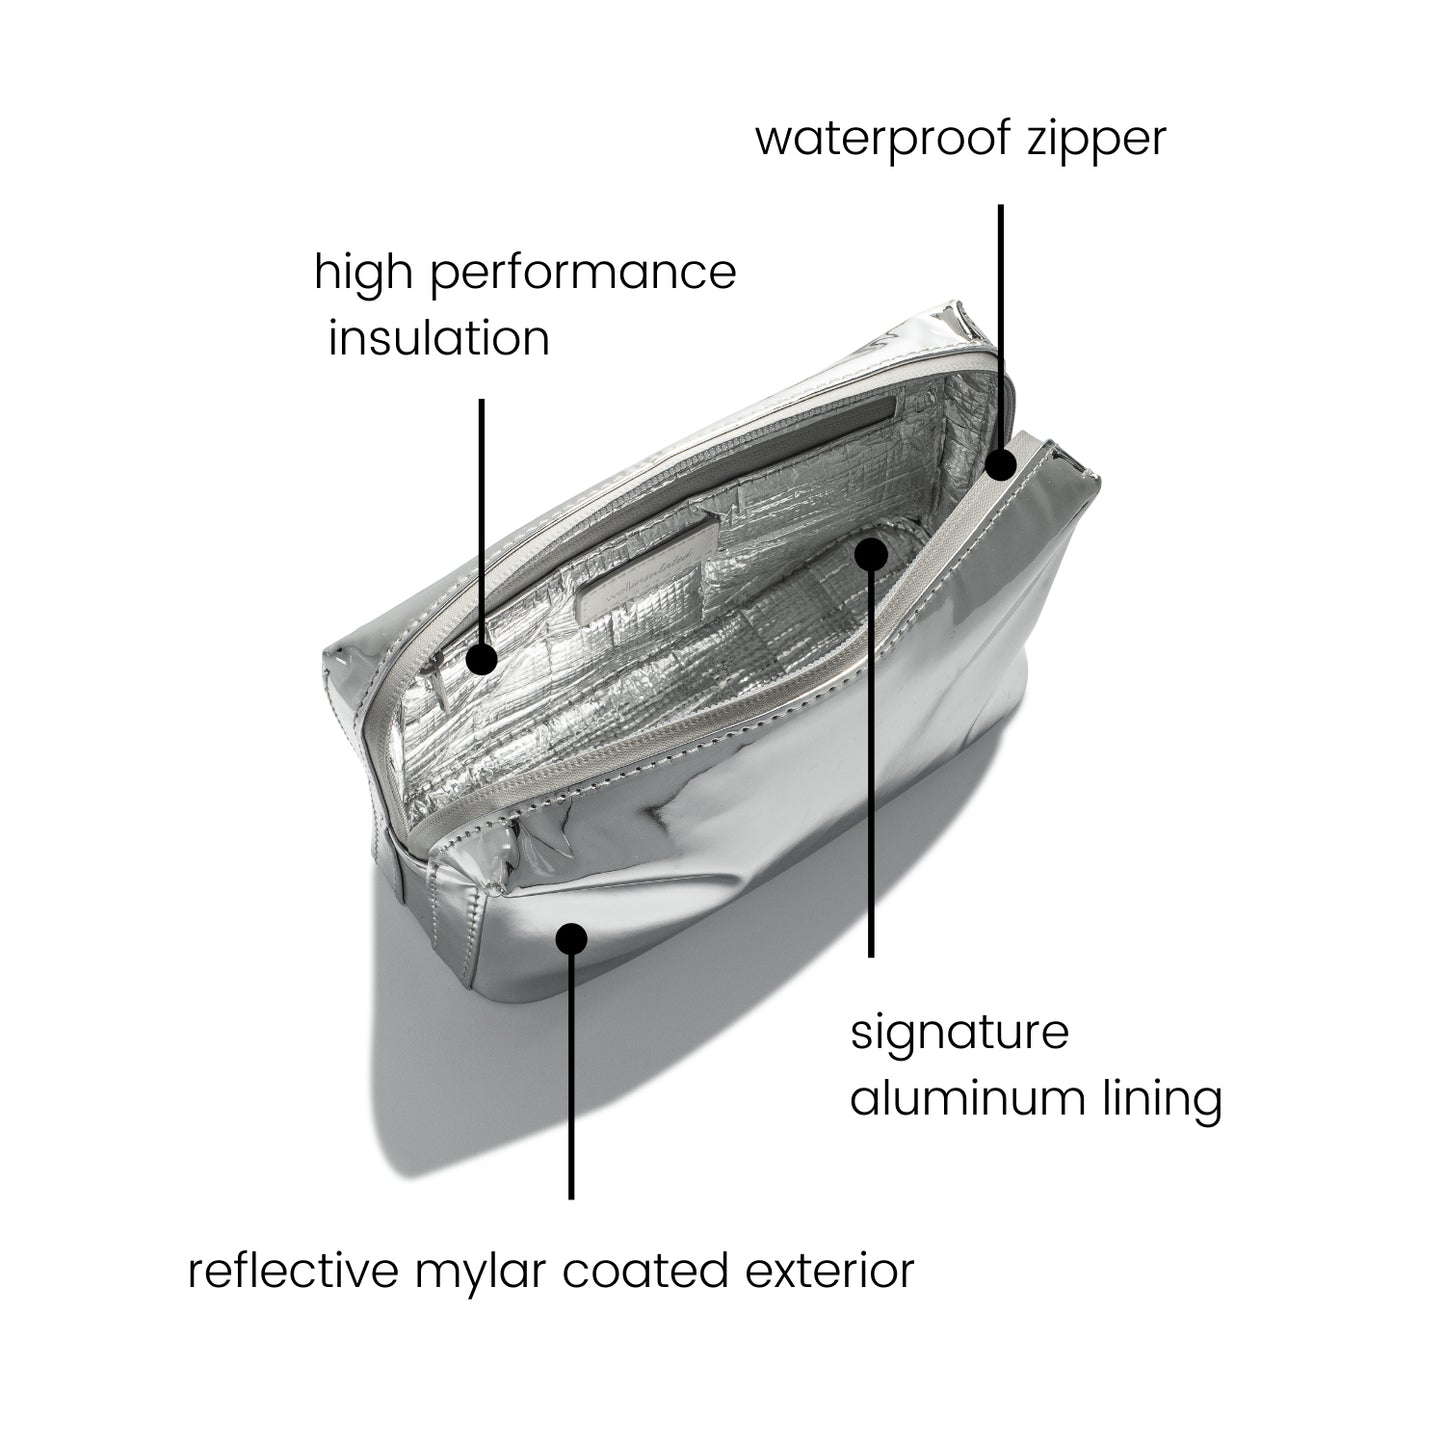 The Well Insulated Beauty Bag shown from the top with the zipper open to show the metallic silver interior.  There is text describing the bags attributes and qualities.